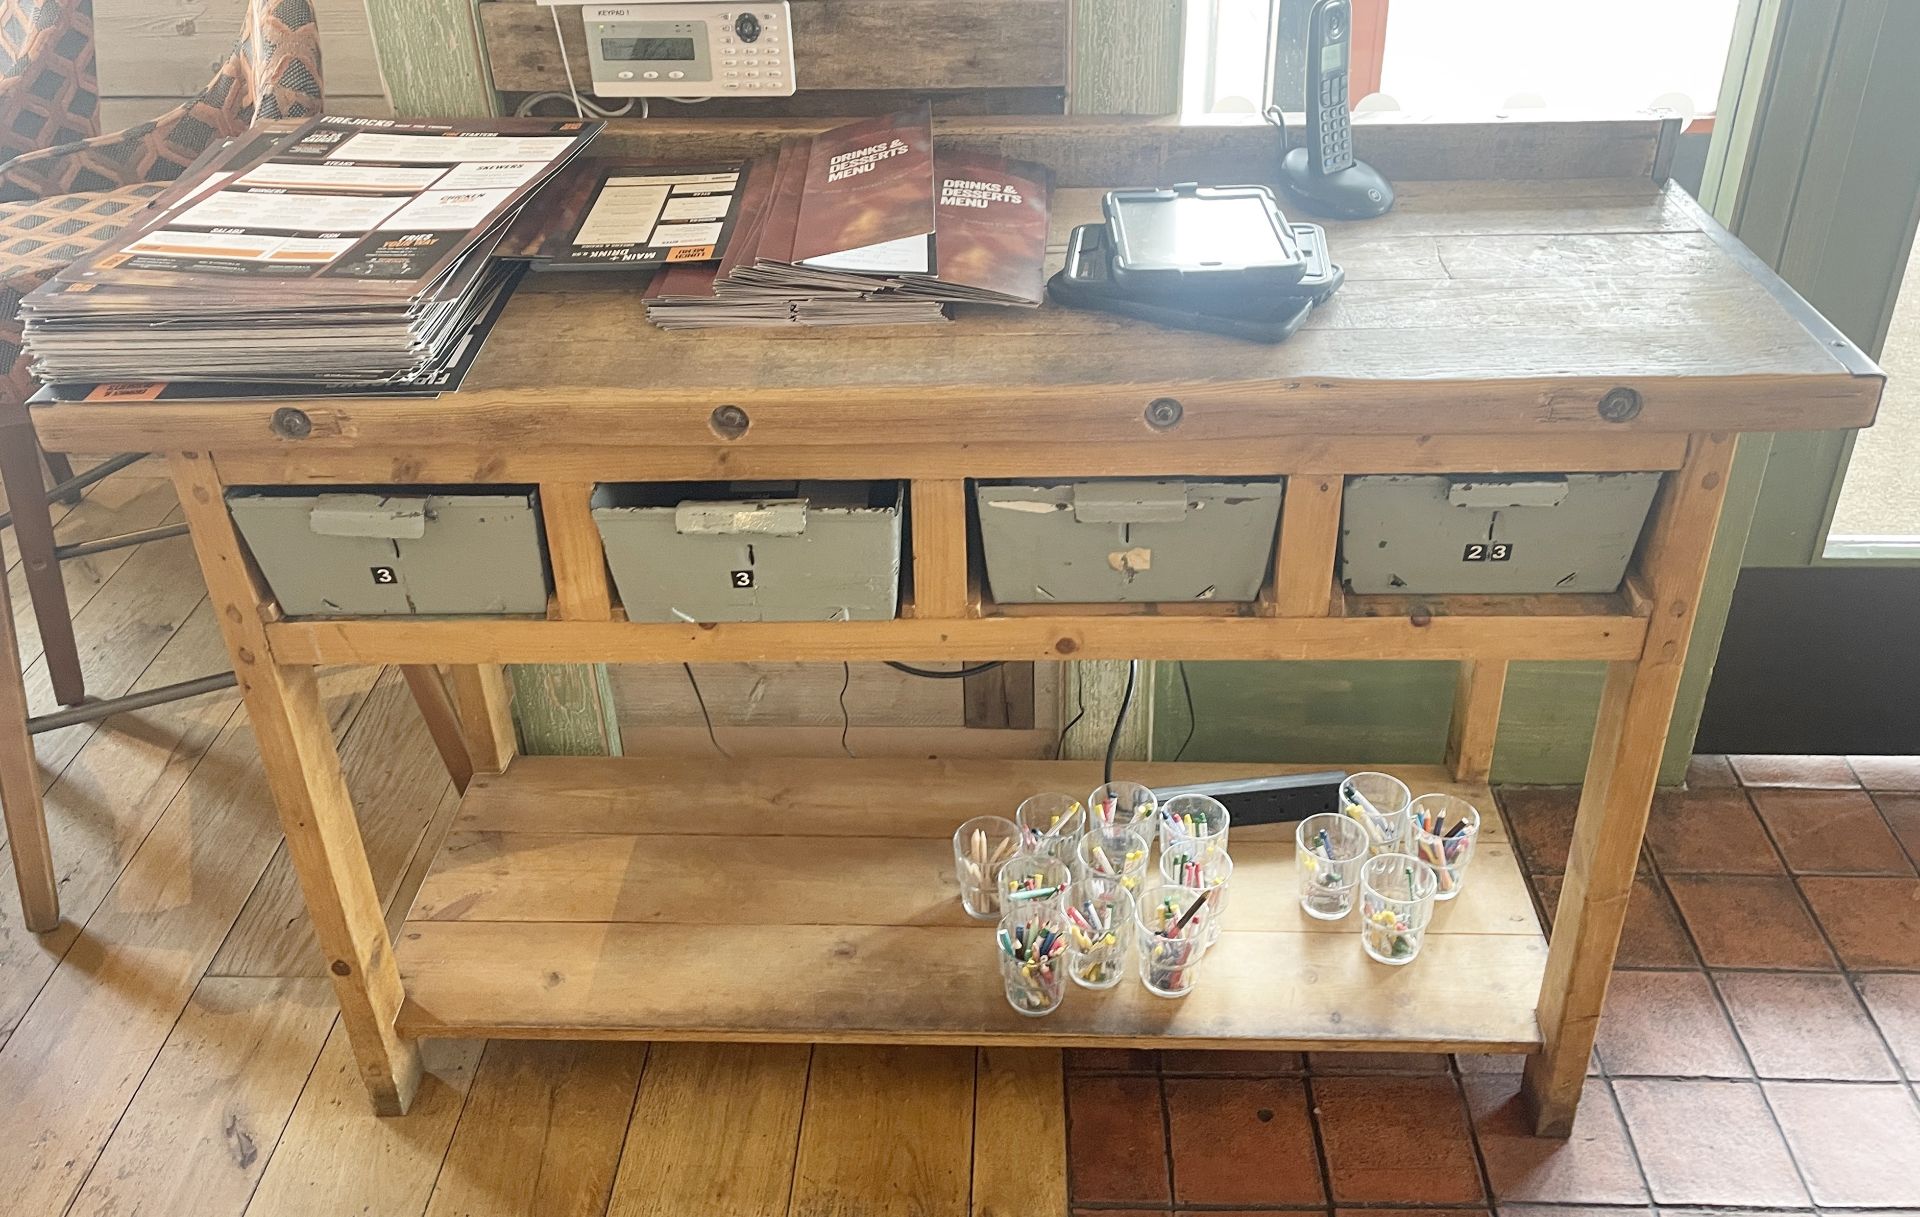 1 x Rustic Wood Console Server Unit With Undershelf and Four Vintage Style Draws - Dimensions: H x W - Image 7 of 7